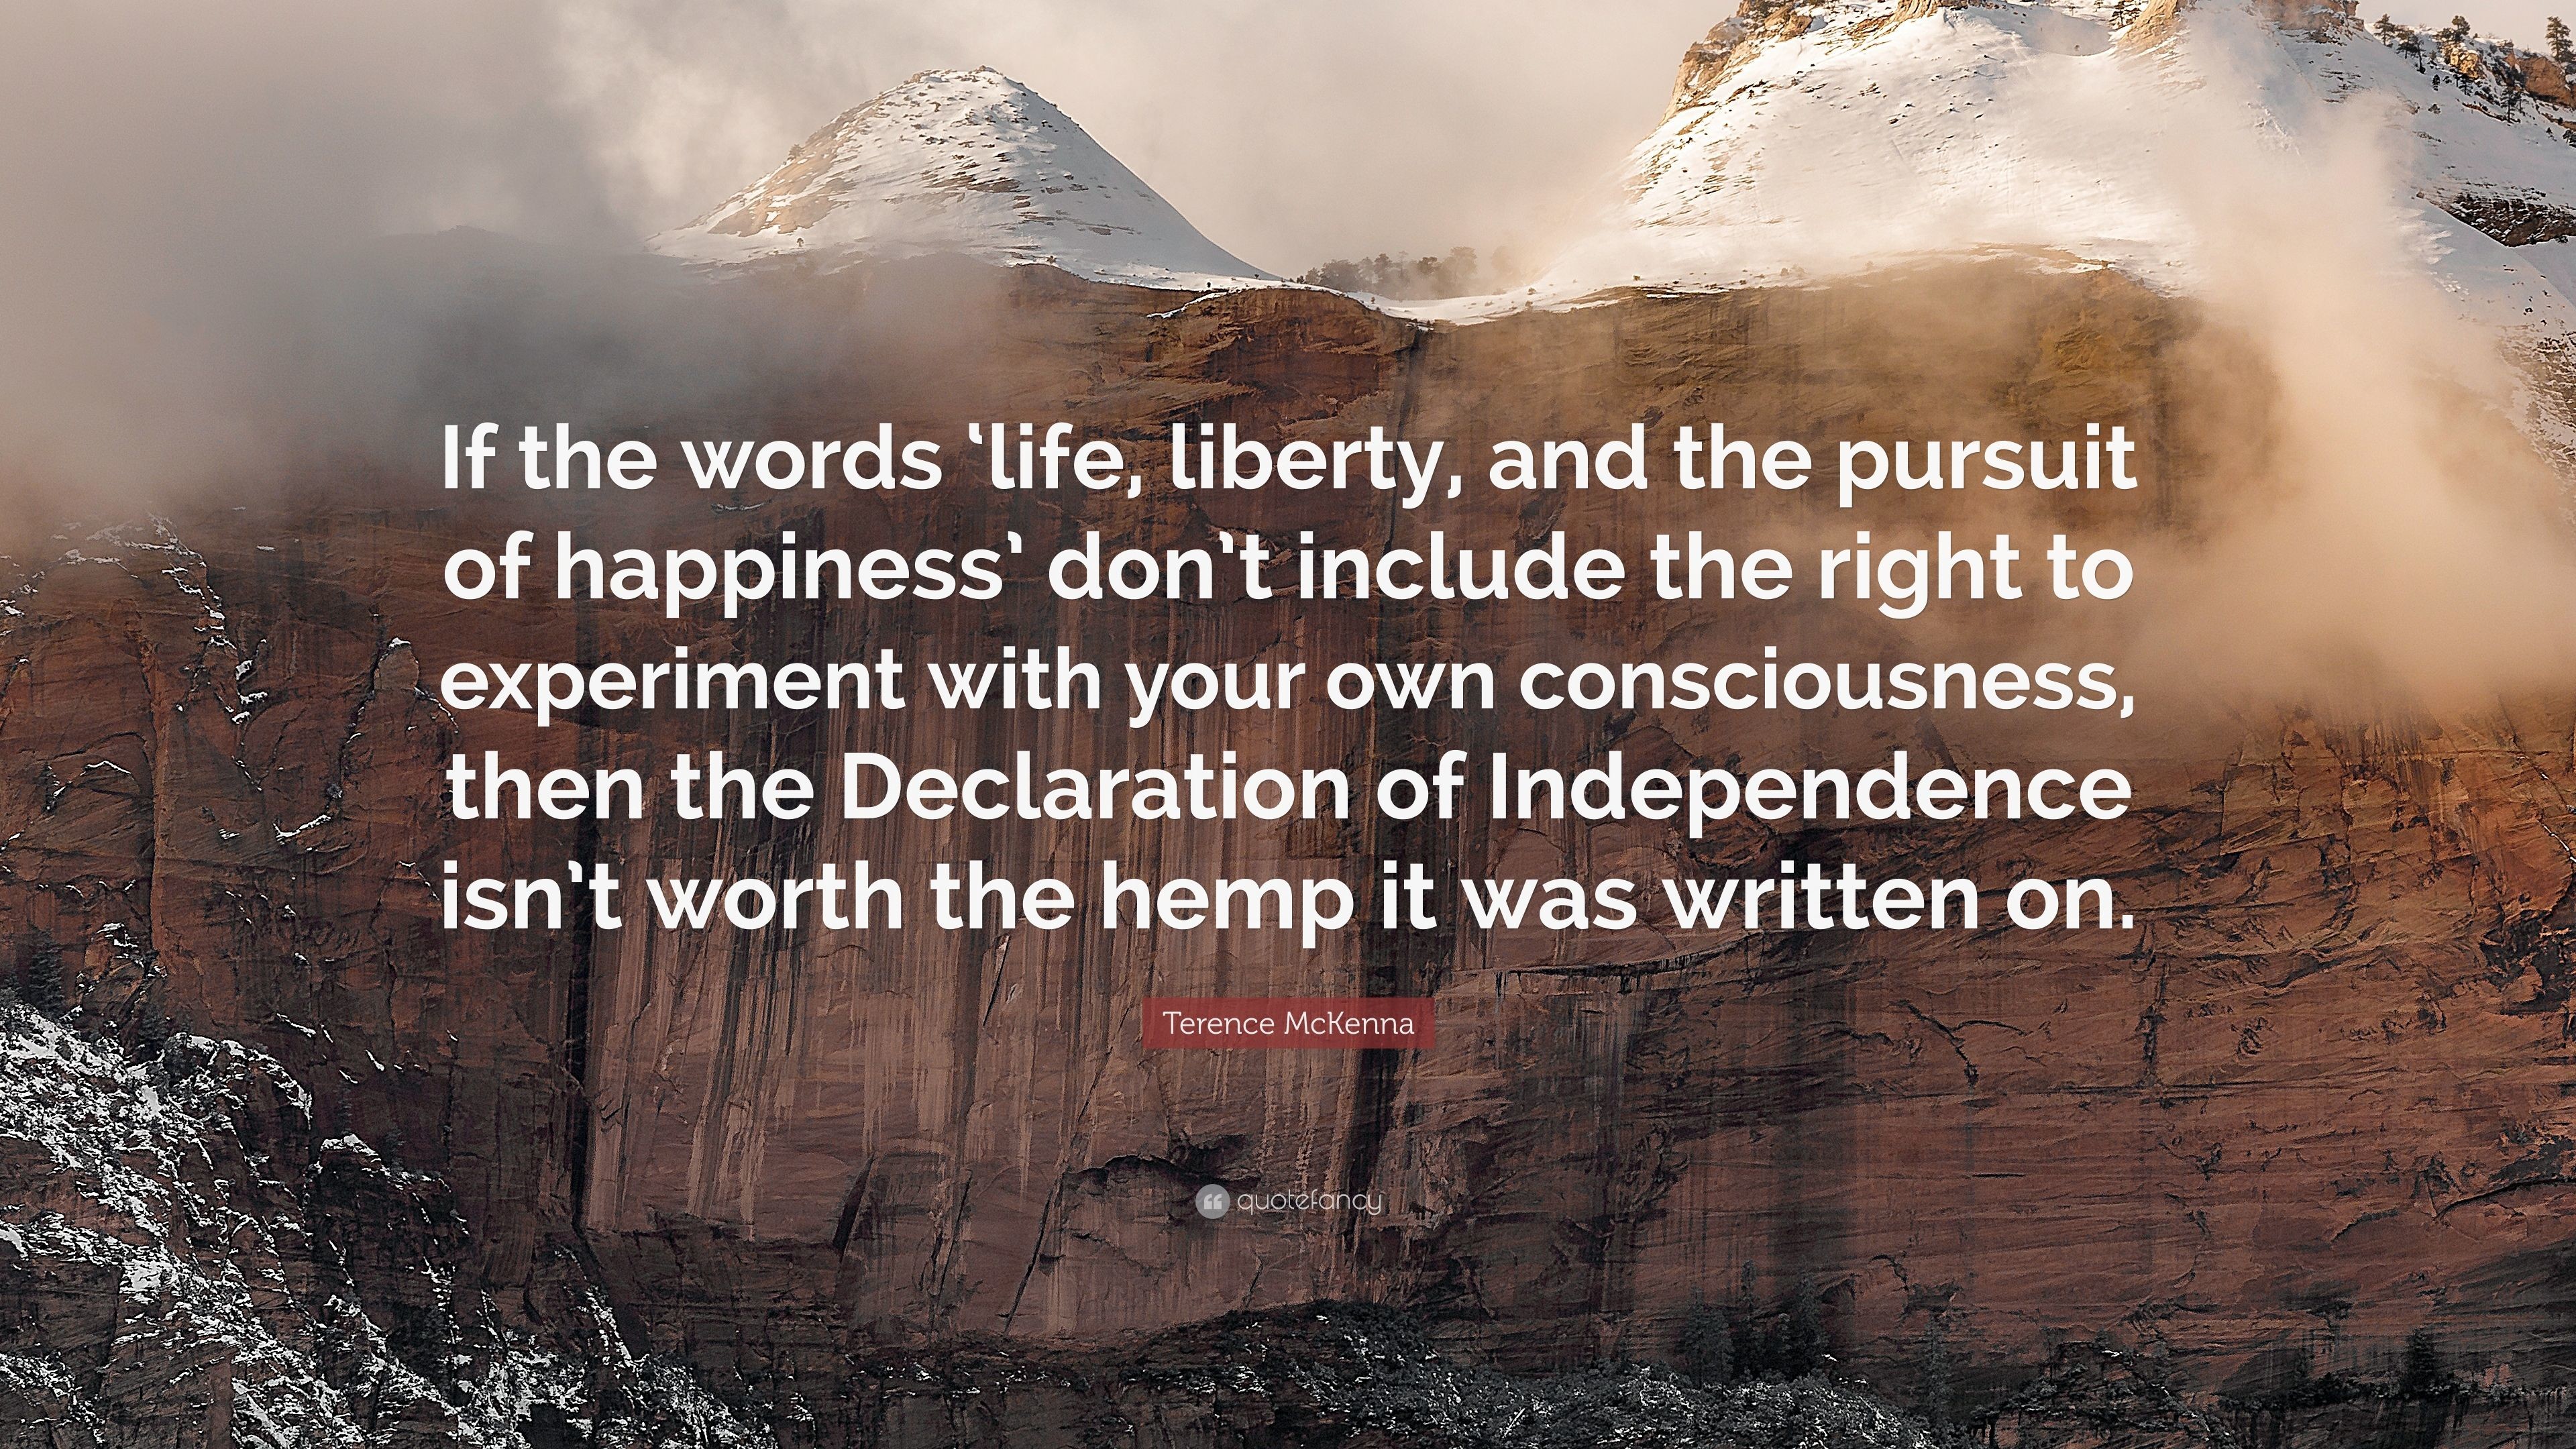 3840x2160 Terence McKenna Quote: “If the words 'life, liberty, and the pursuit